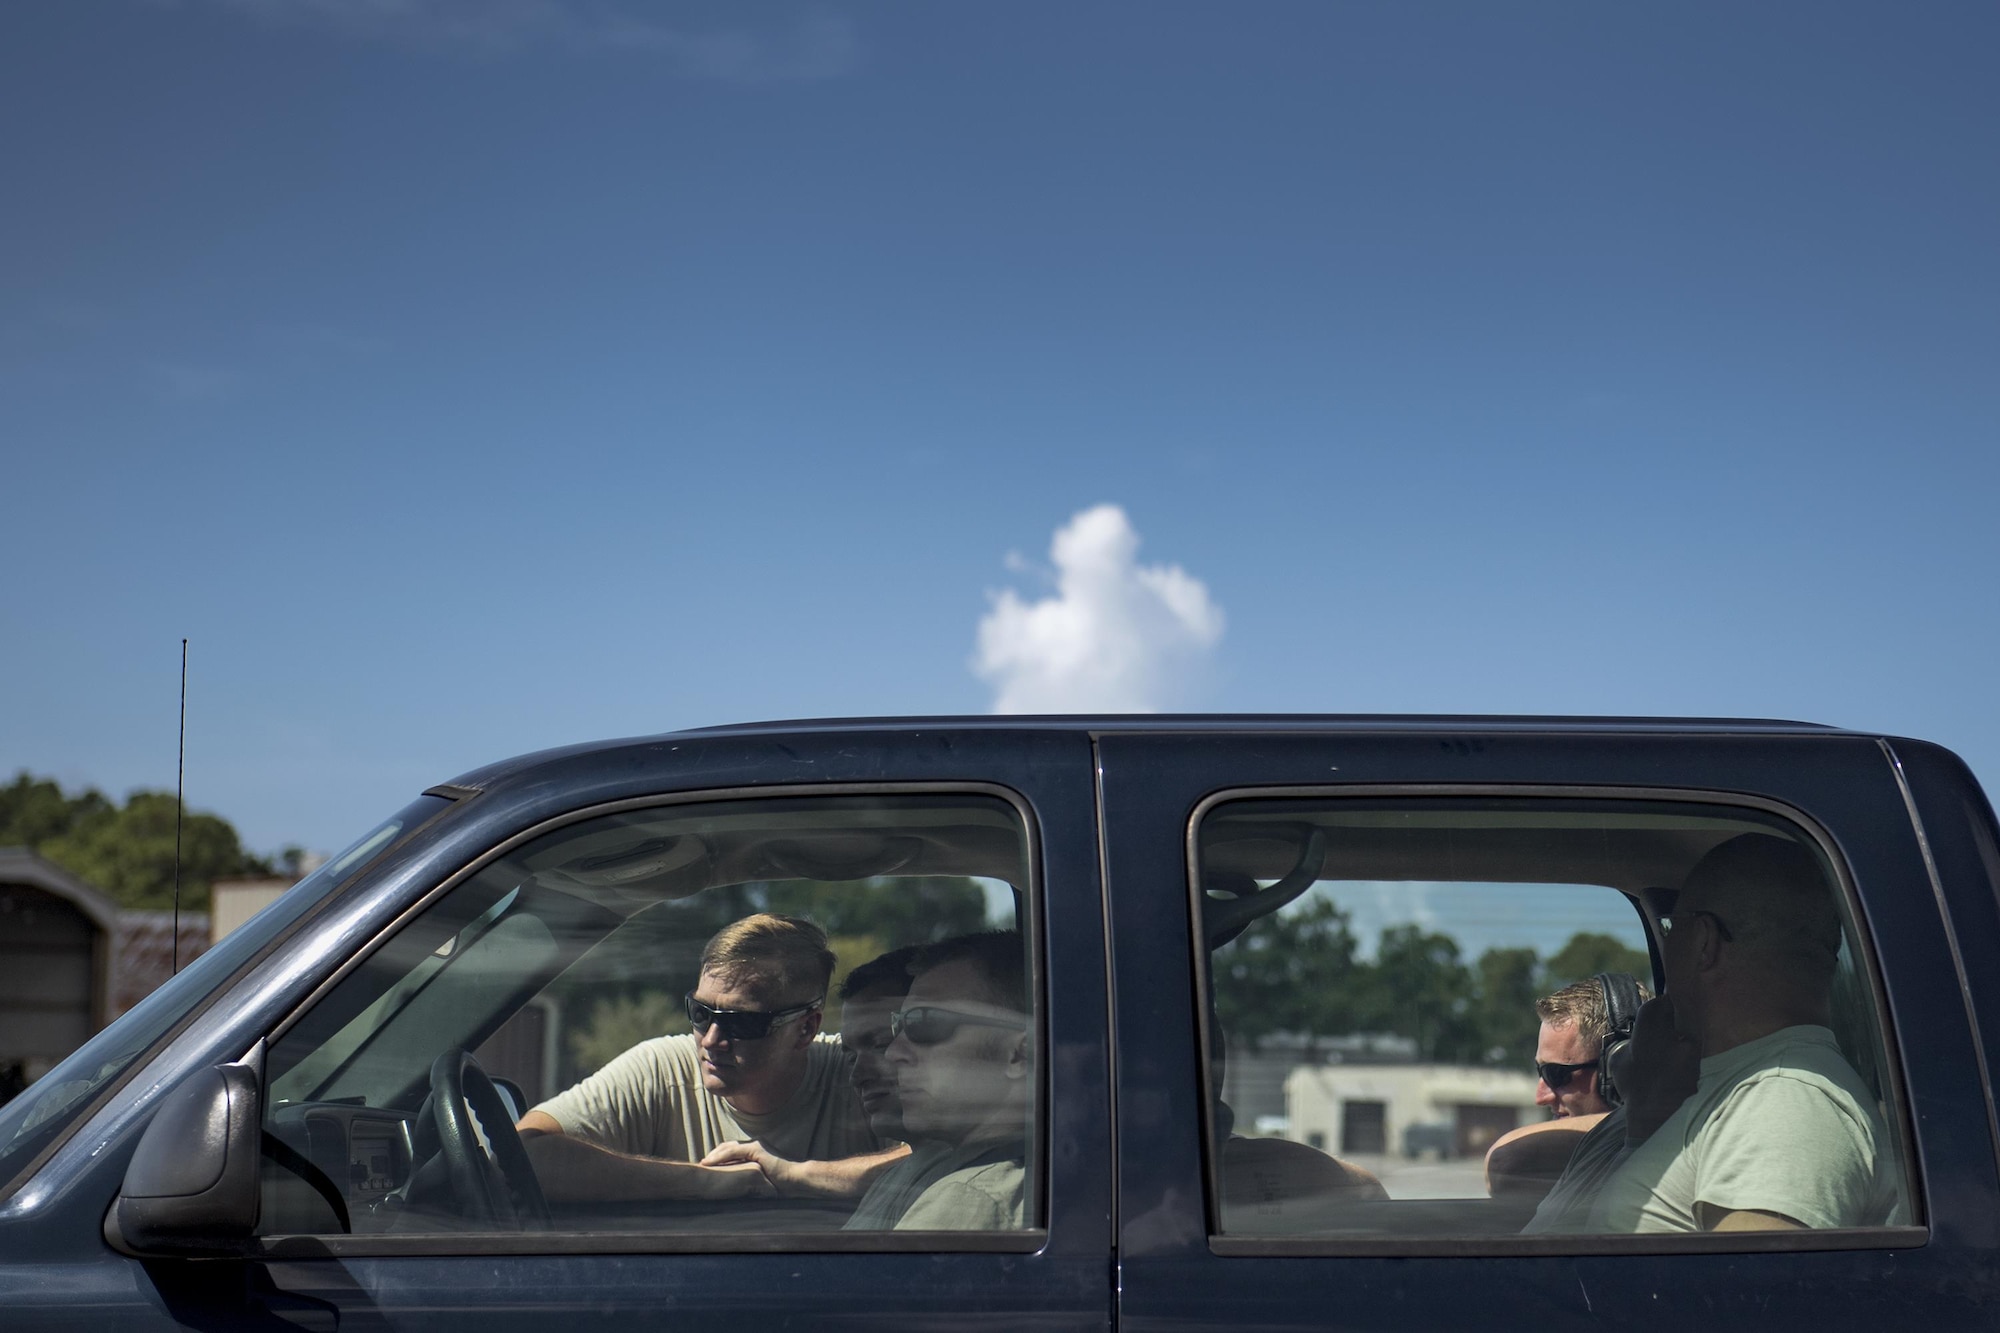 Maintainers from the 41st Helicopter Maintenance Unit catch a break from the heat in an air-conditioned truck, Aug. 8, 2017, at Tyndall Air Force Base, Fla.